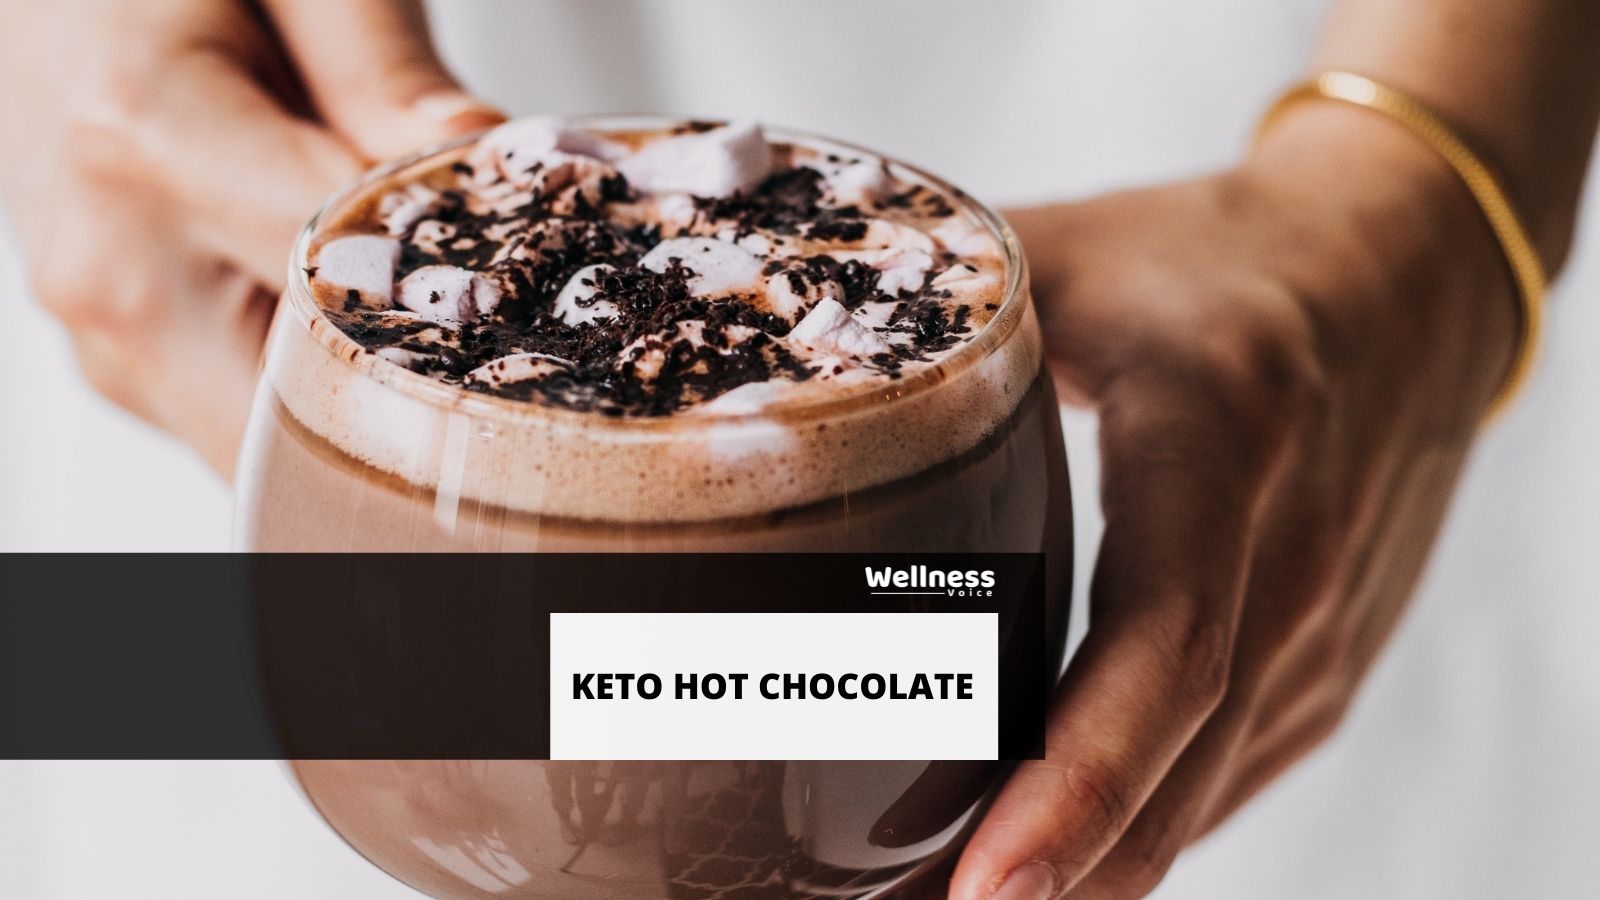 Is there a Keto Hot Chocolate?